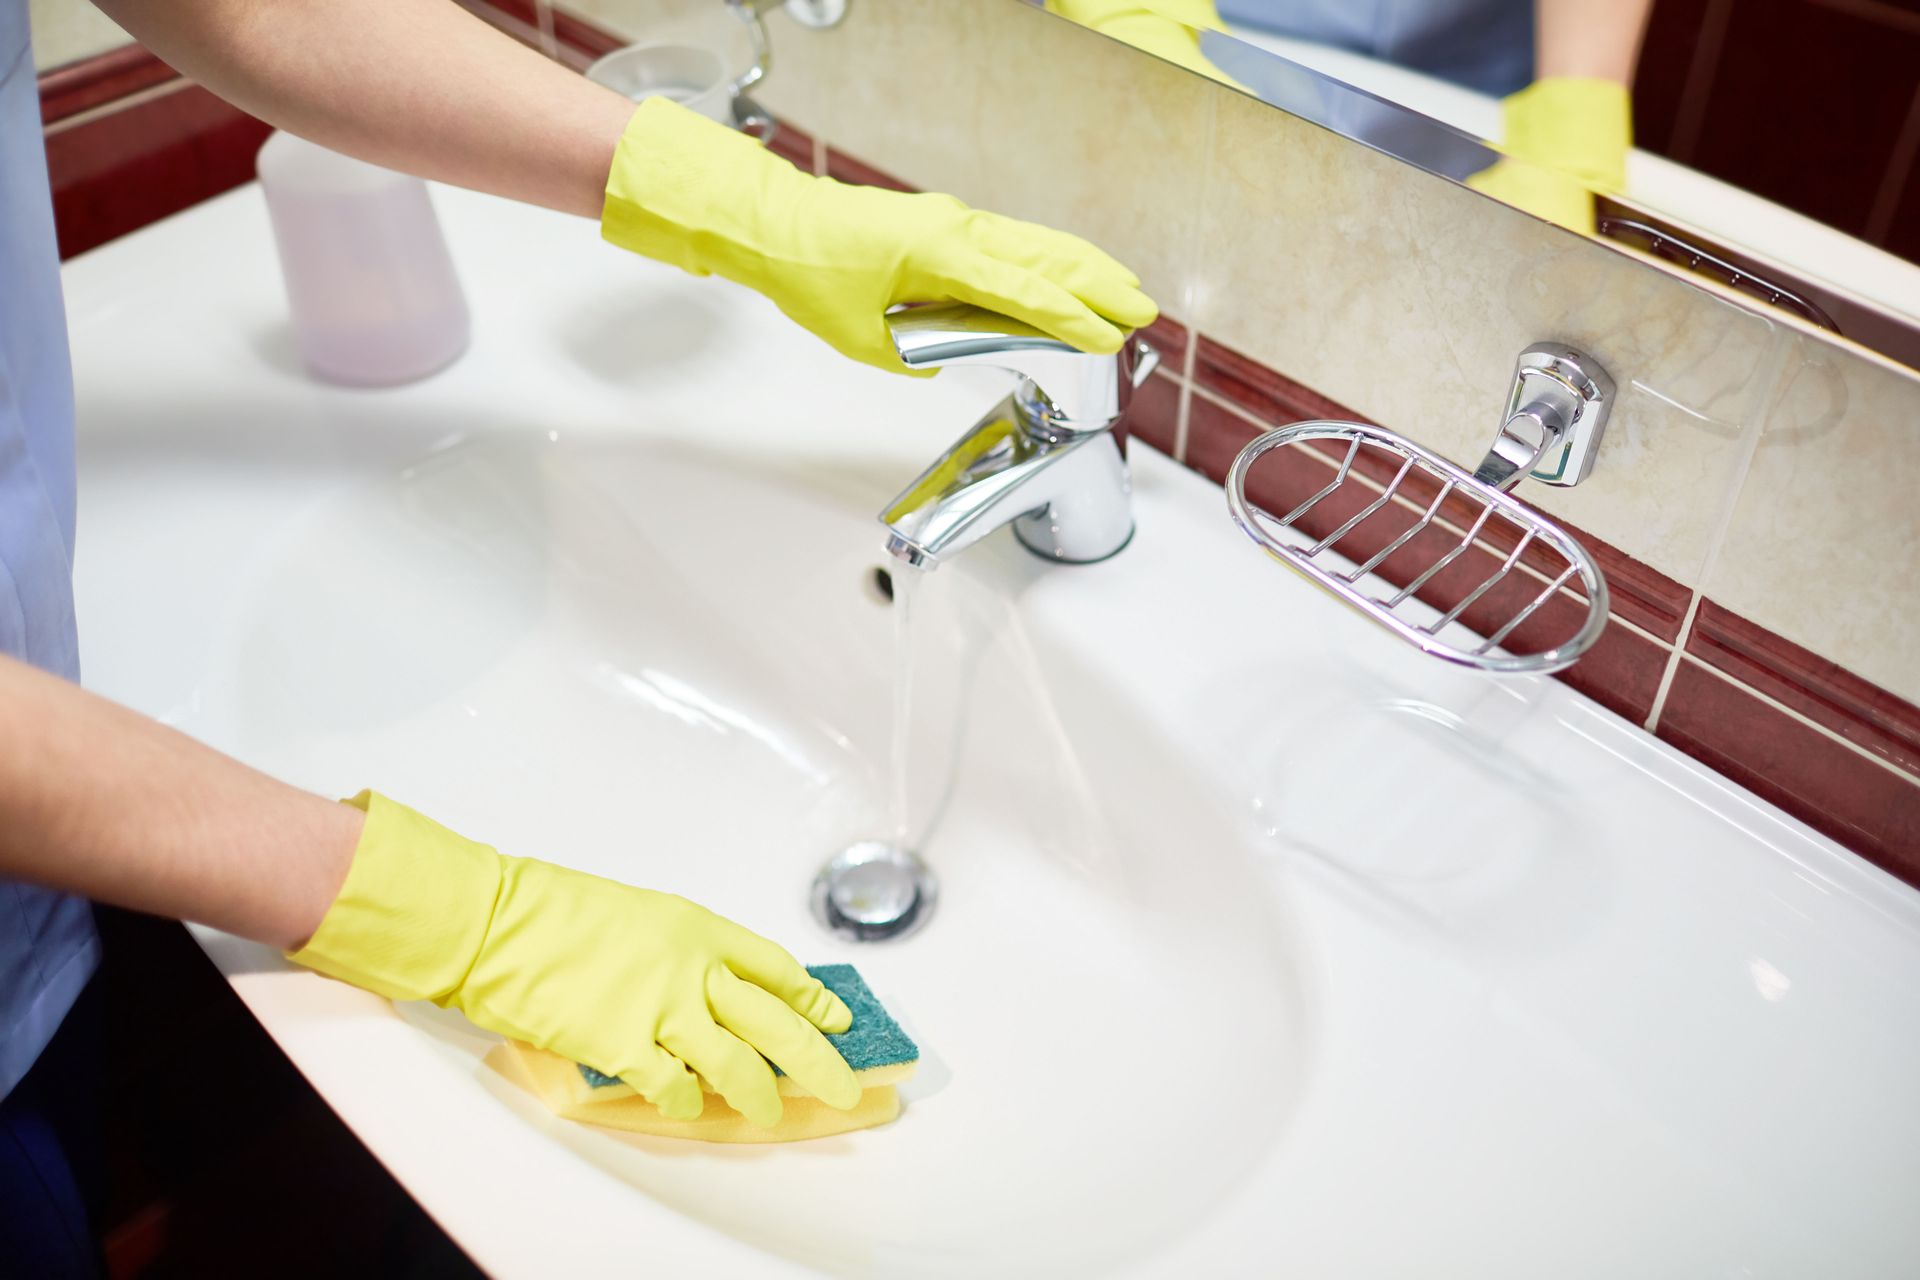 residential cleaning